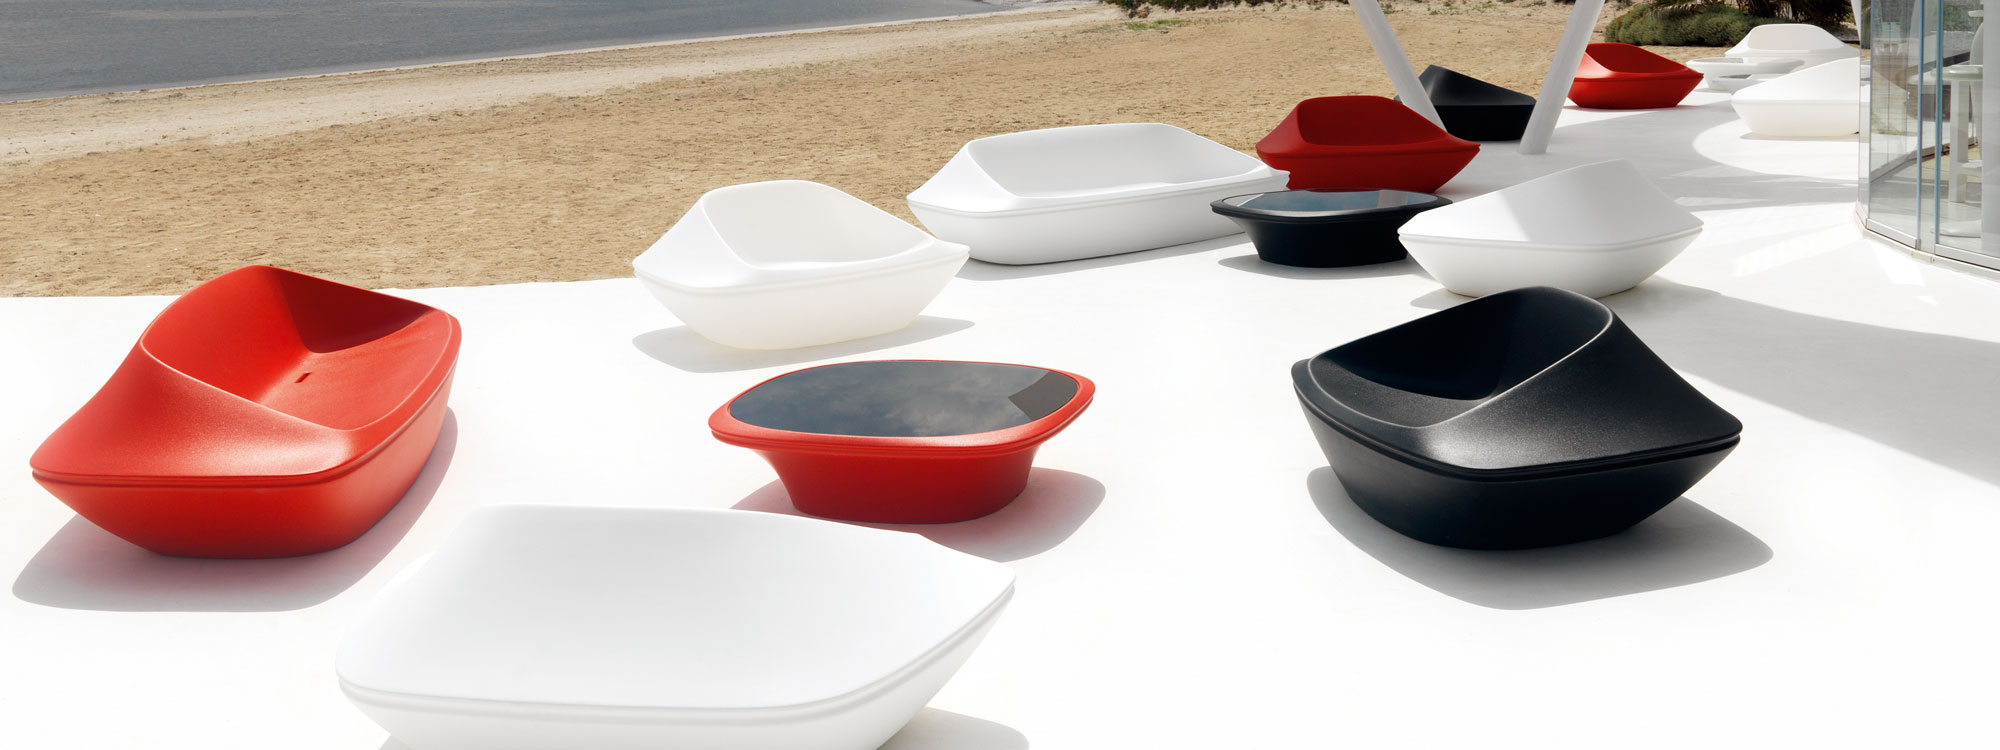 Image of different coloured Vondom UFO futuristic garden furniture on white terrace with sand and sea in the background